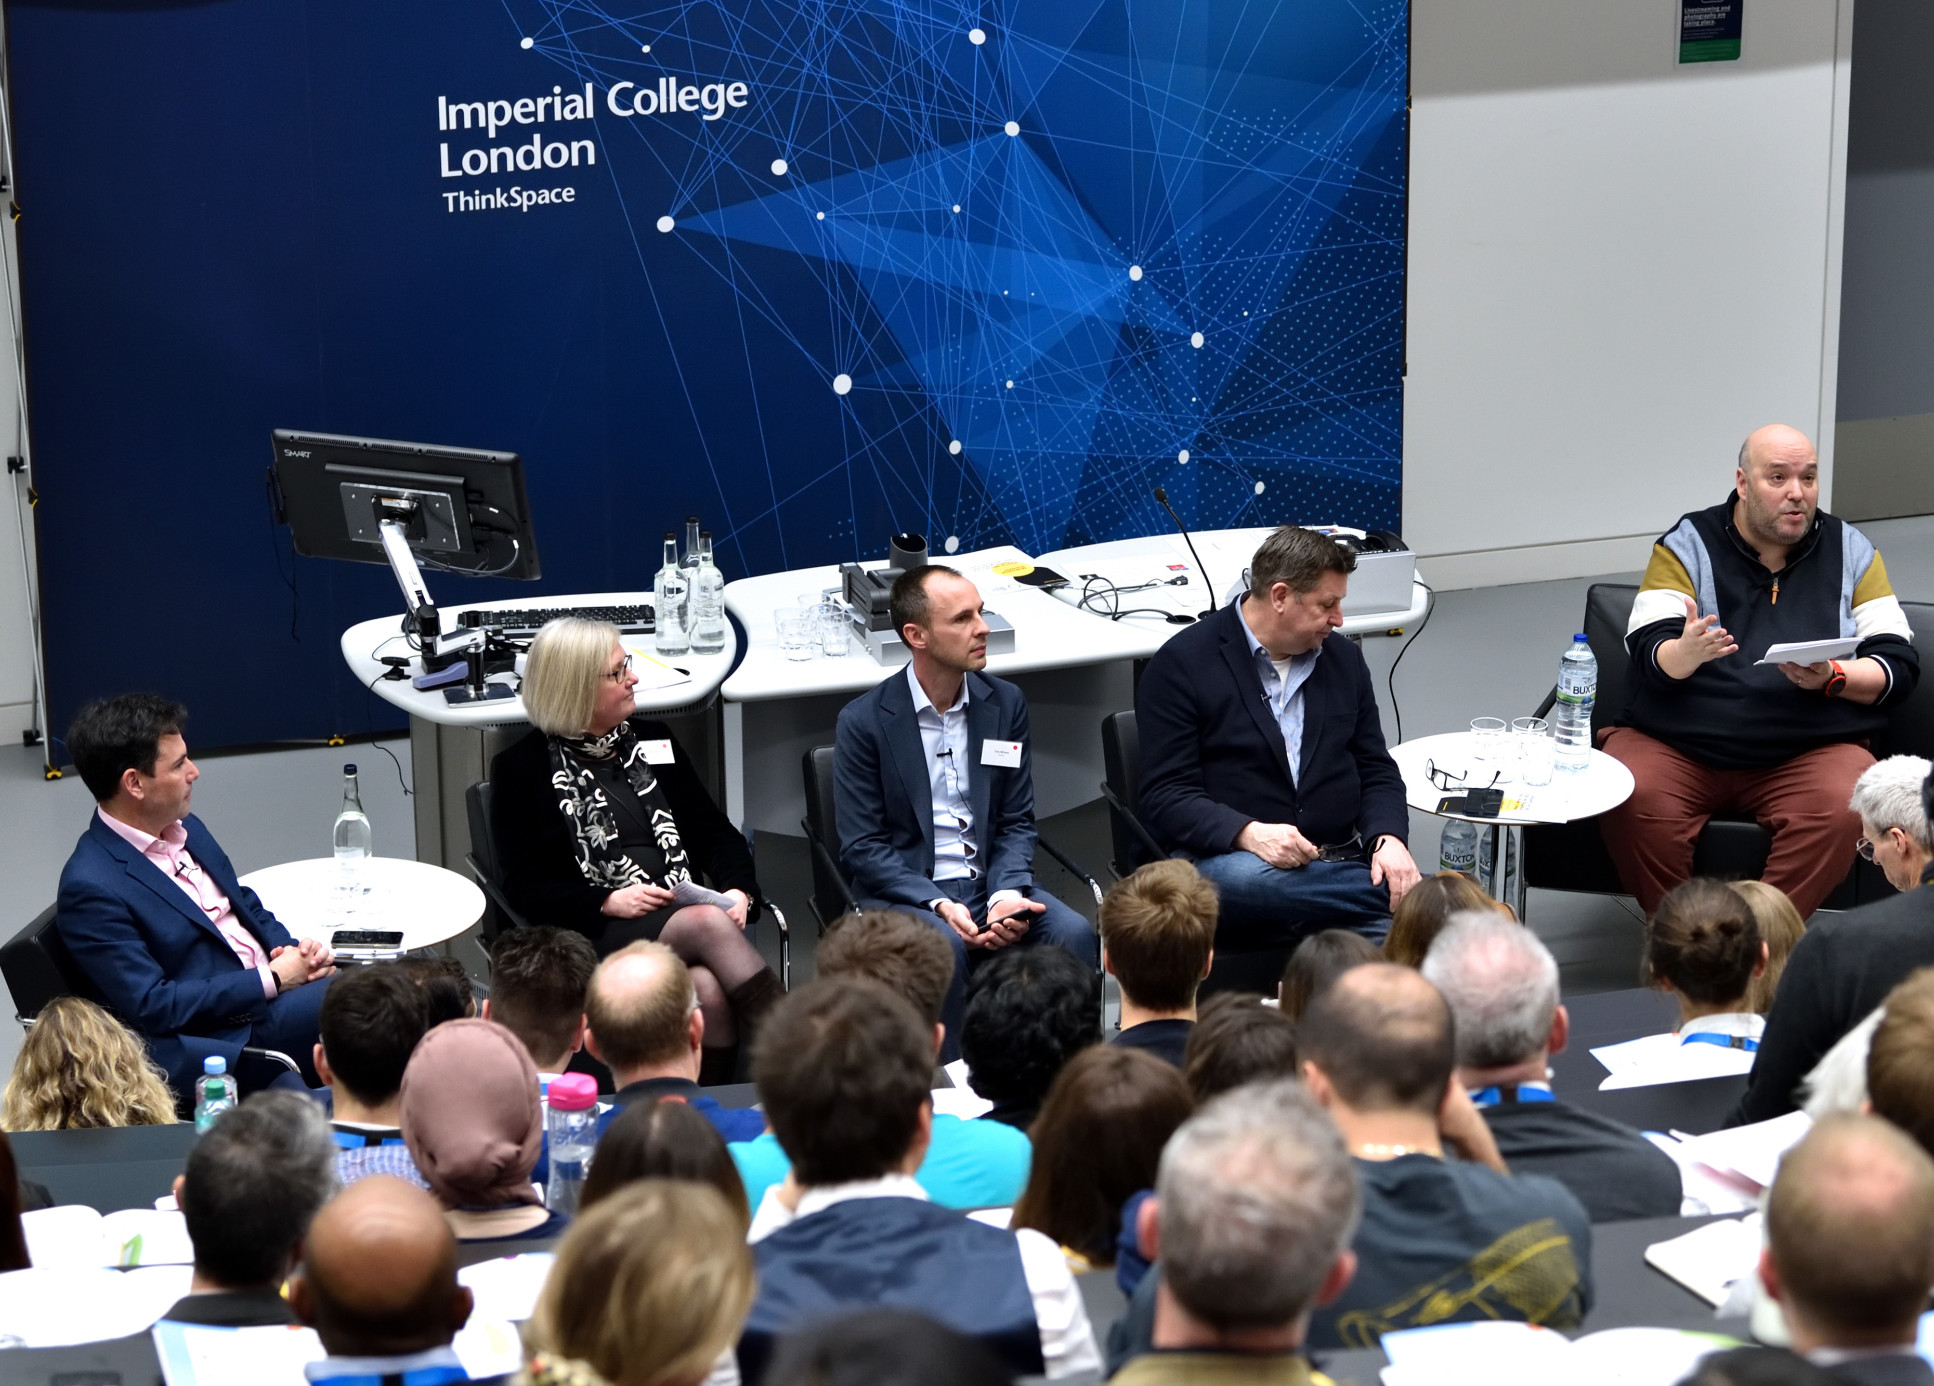 A panel discussion on hard-wiring collaboration into the life science community in White City